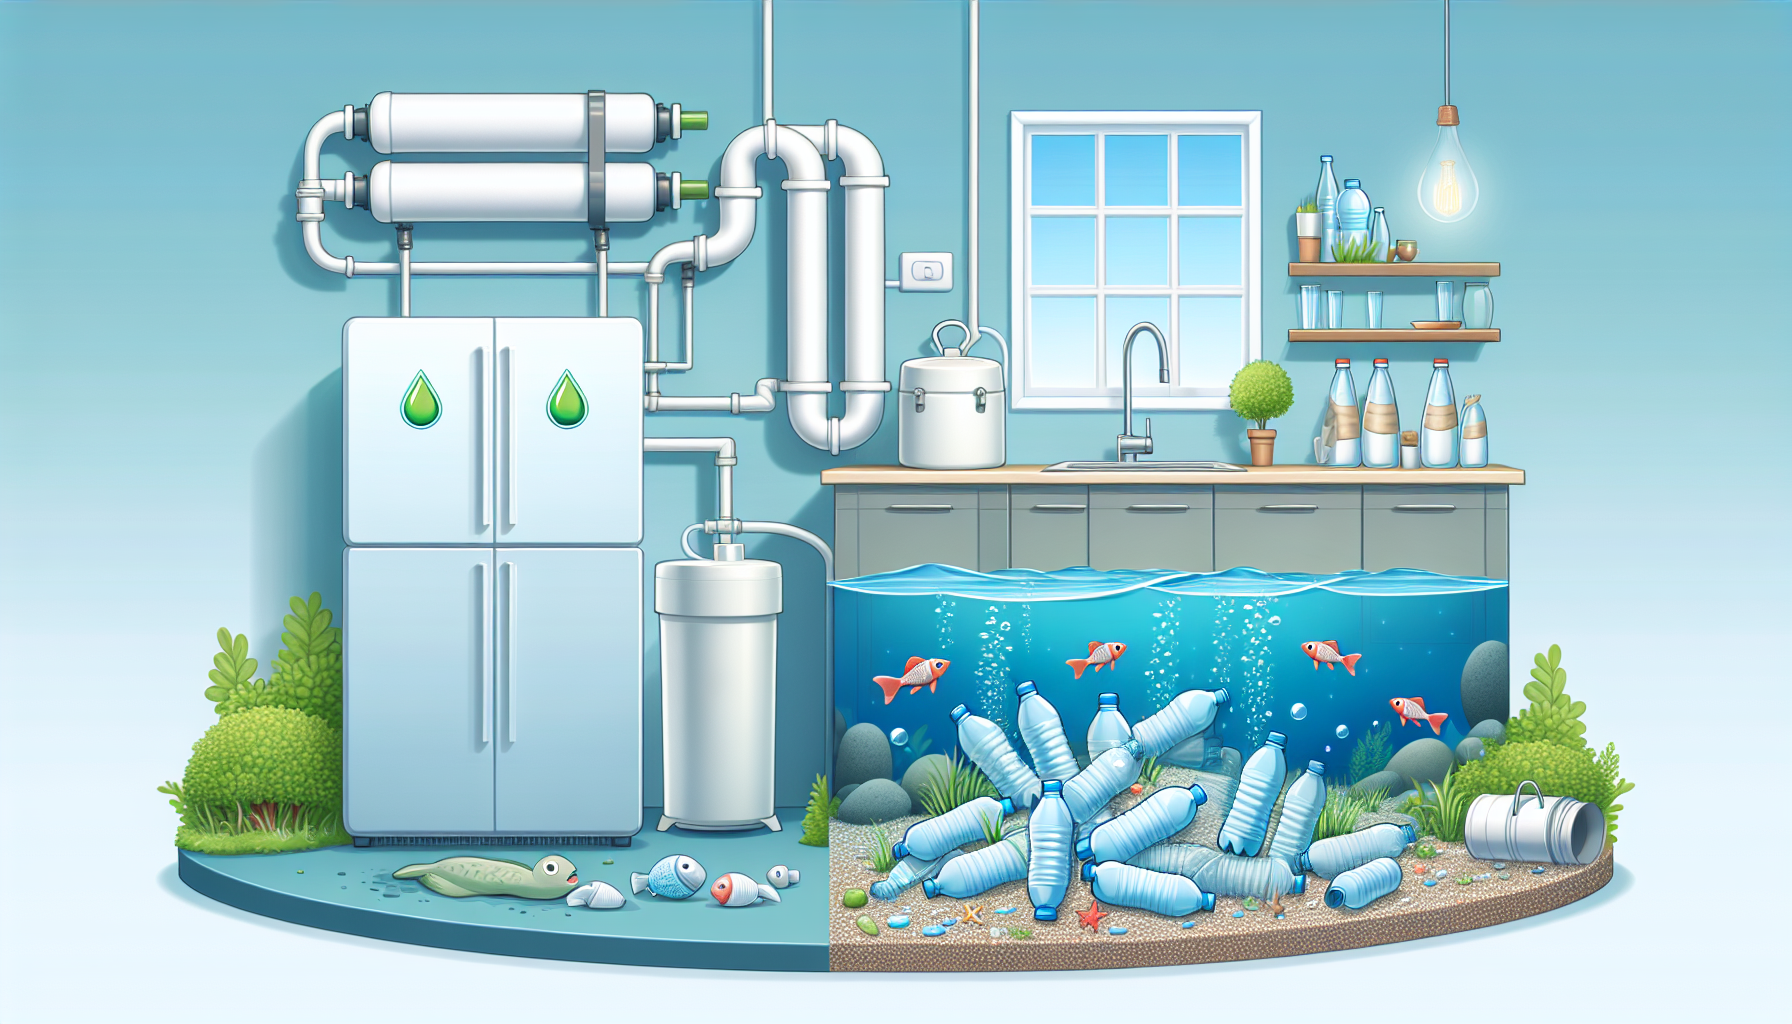 Illustration of environmental impact of reverse osmosis water systems